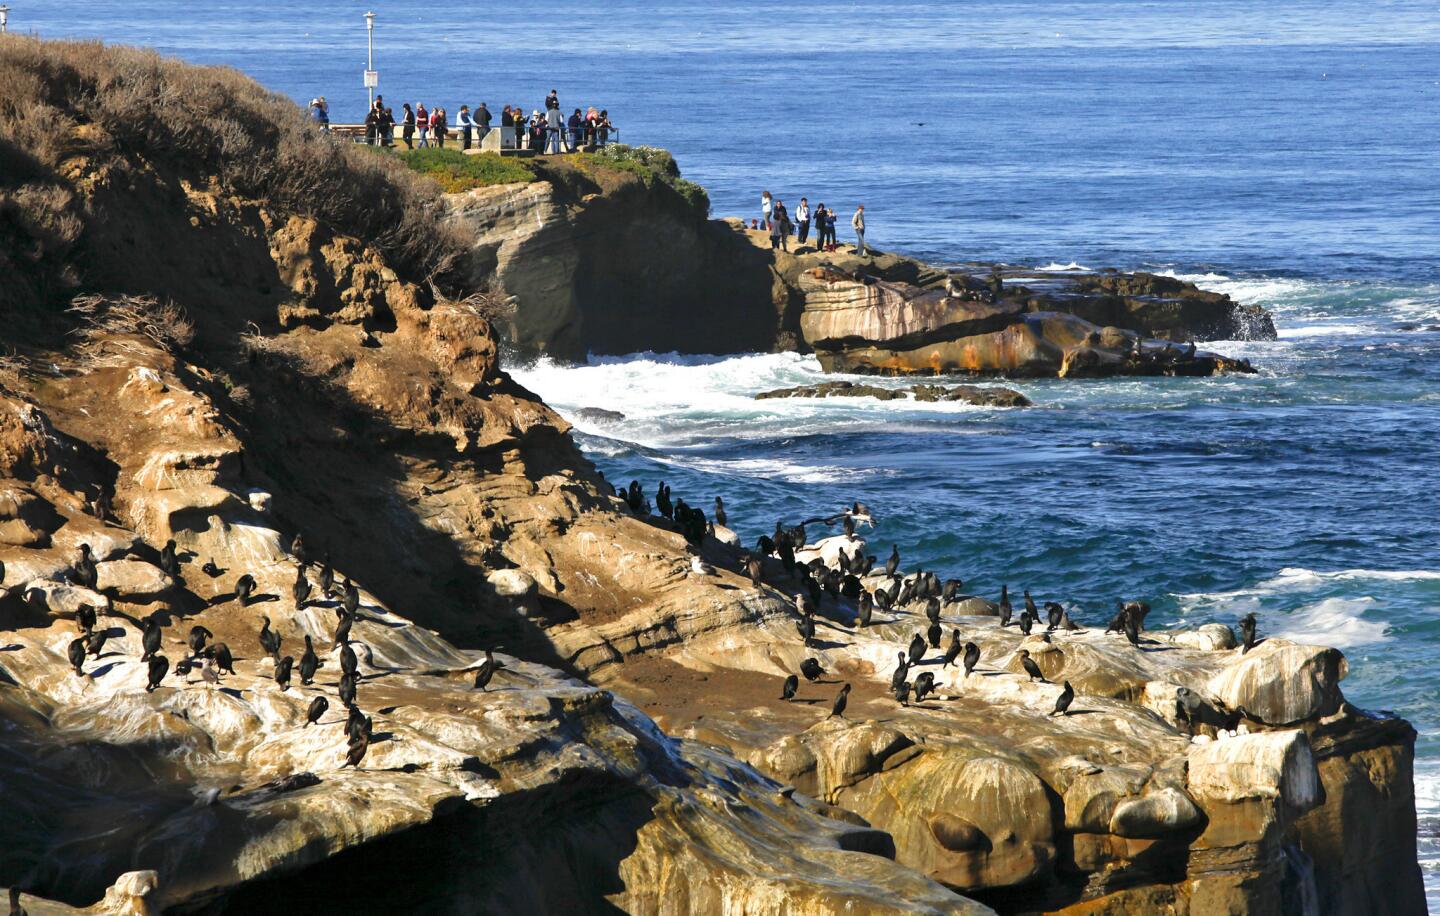 The beauty and tranquility of La Jolla Cove are flawed by the odor of the excrement left behind by the gulls, cormorants, pelicans and sea lions that perch on the rocks.